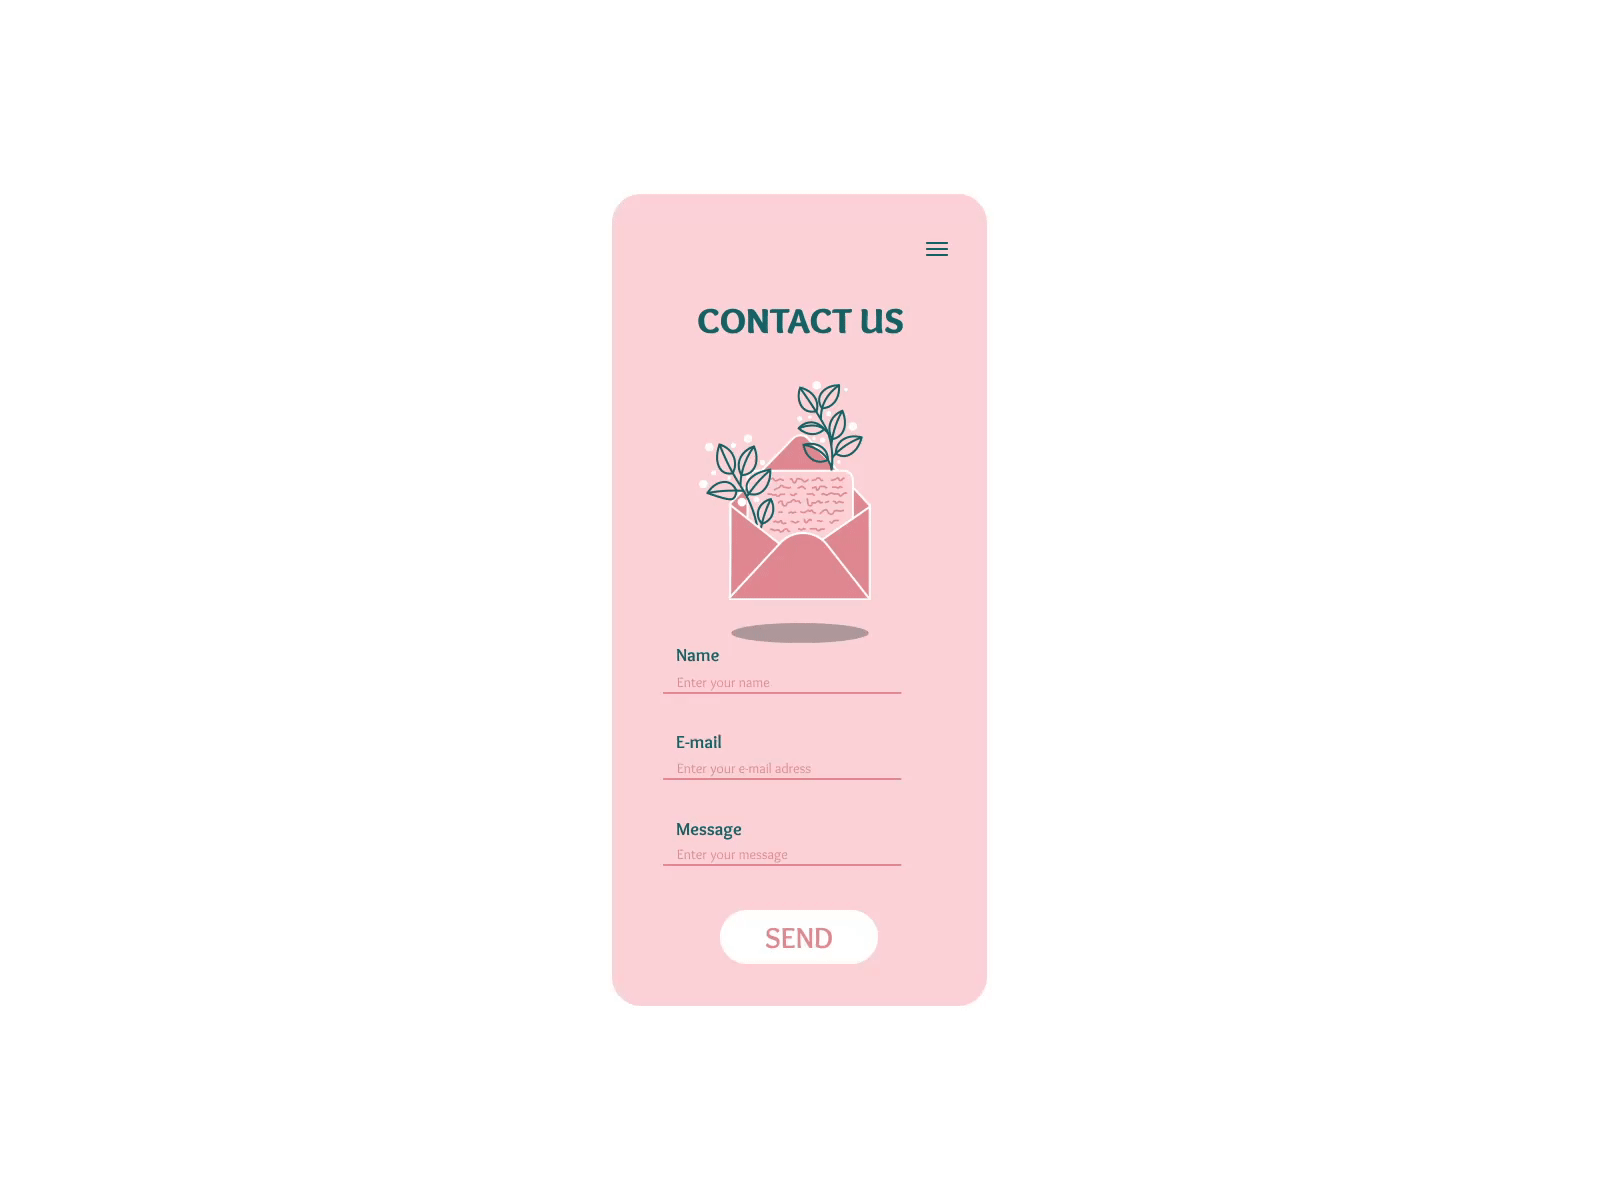 Contact Us animation app contact contact us design illustration ui ui challange user